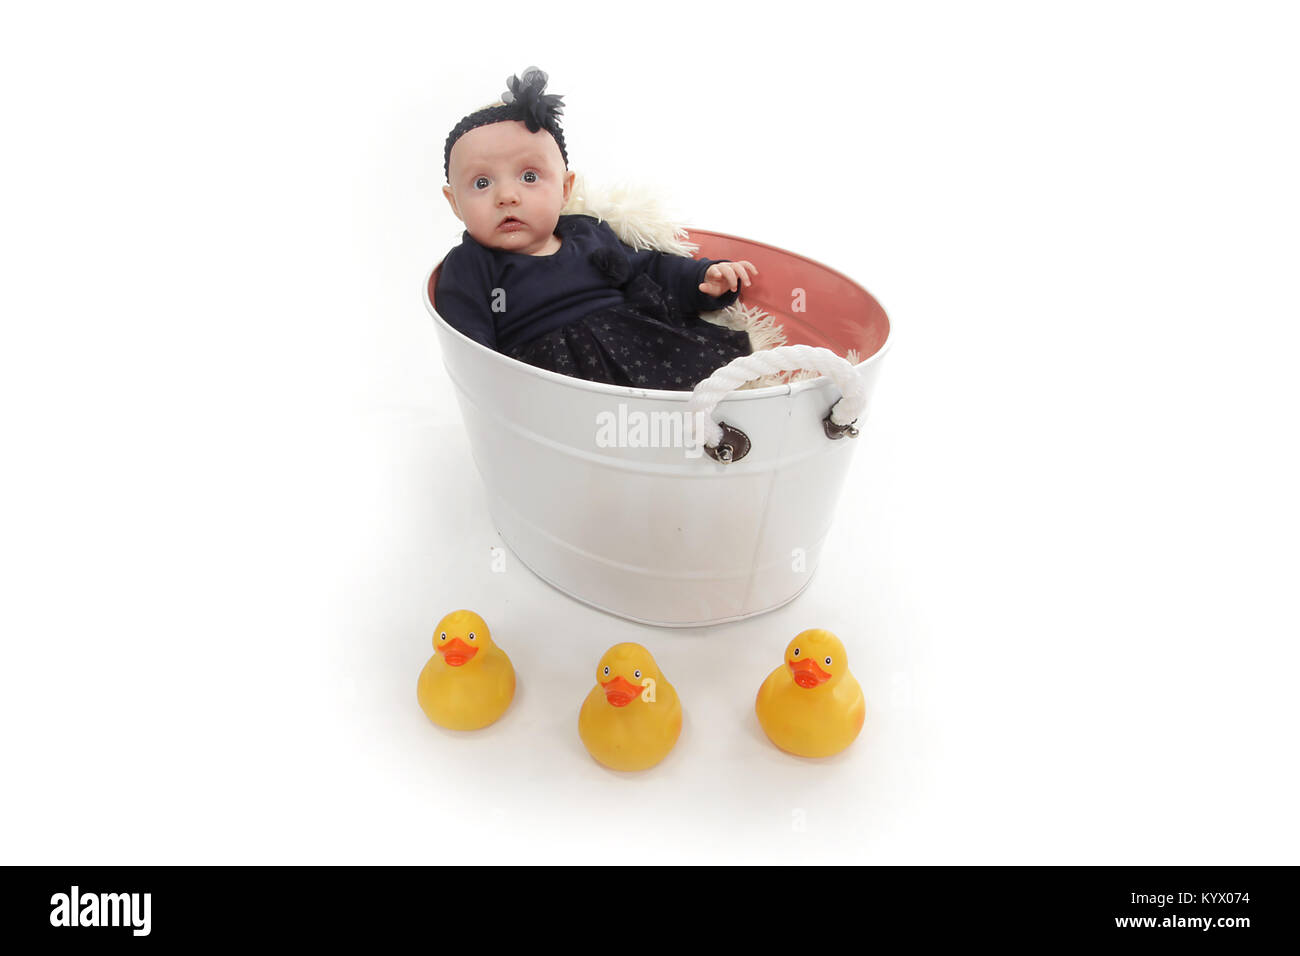 5 month old baby girl with in black dress sitting in a tin tub Stock Photo